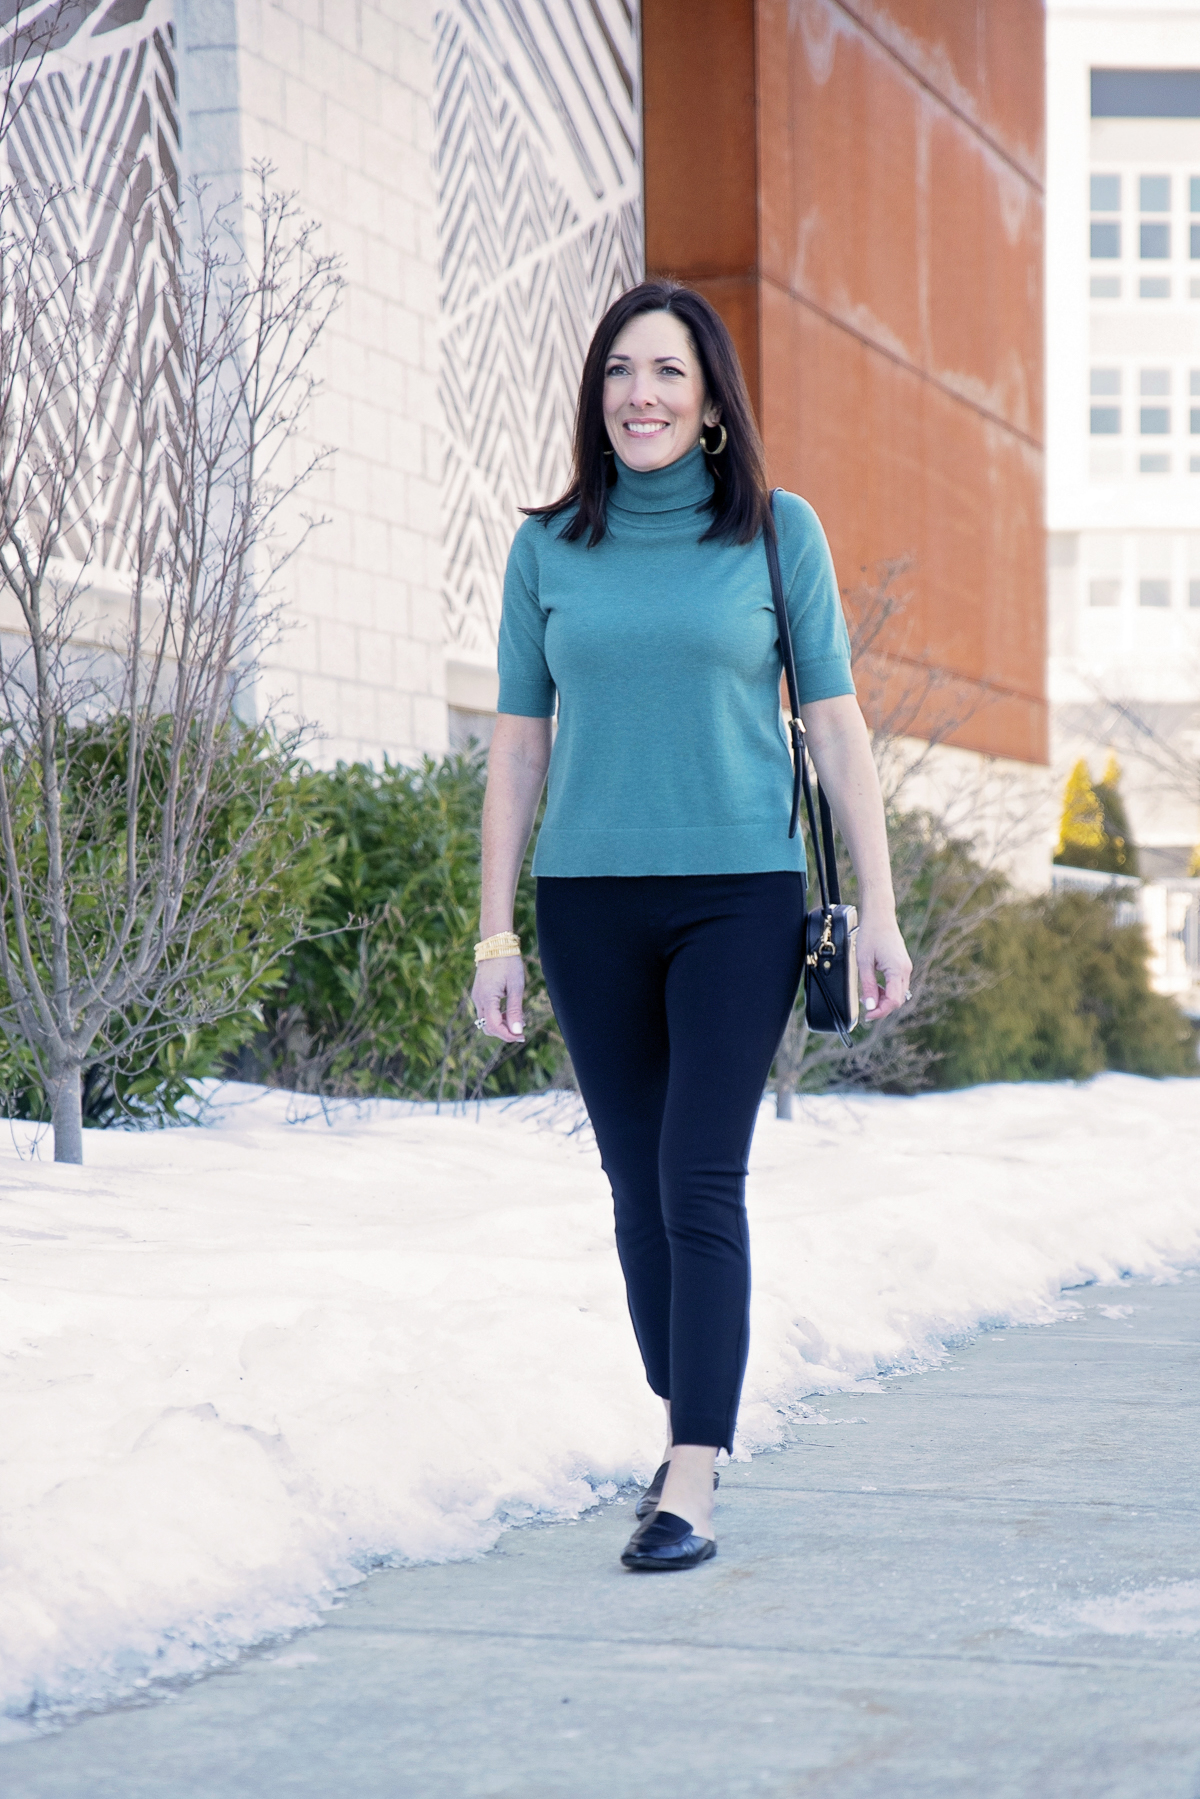 Jo-Lynne Shane wearing a polished spring work wear look with a teal short-sleeve turtleneck, black Spanx skinny pants, and Everlane loafer mules.